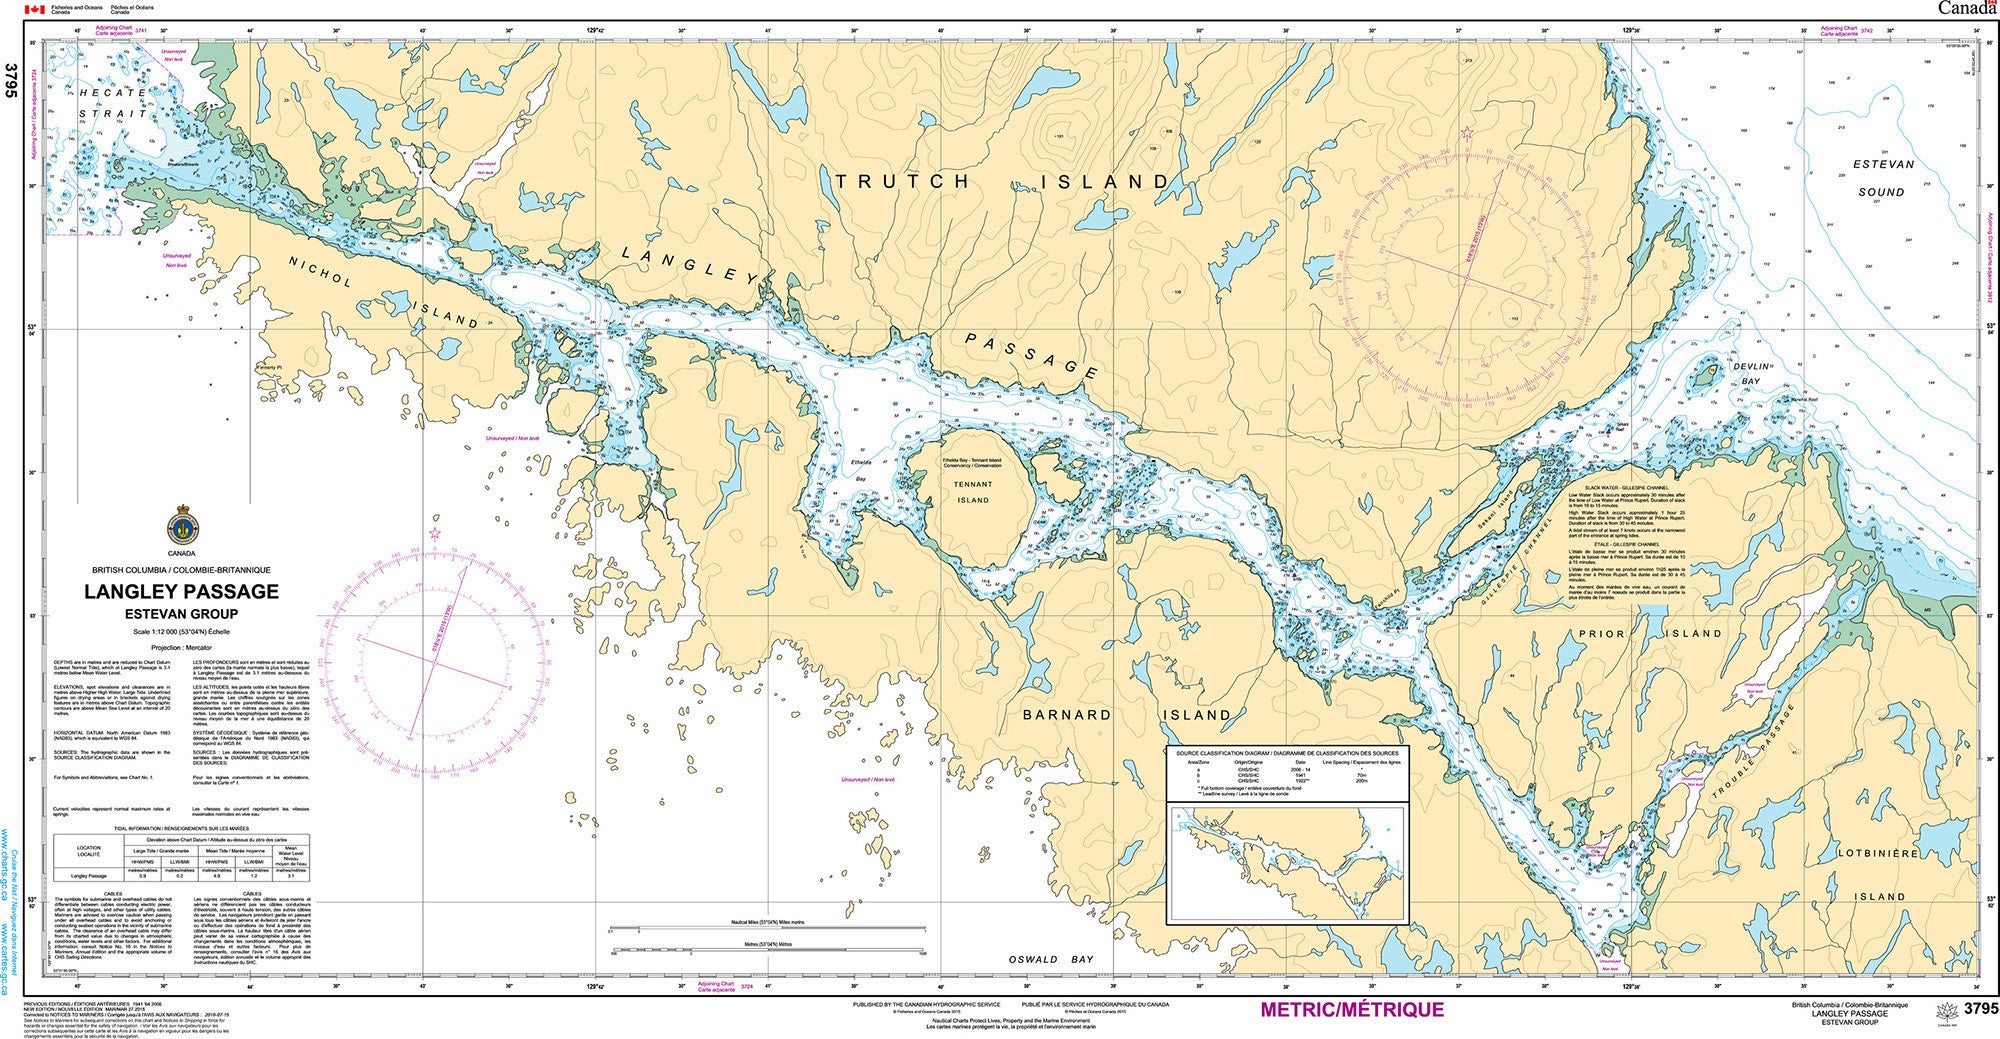 Canadian Hydrographic Service Nautical Chart CHS3795: Langley Passage, Estevan Group